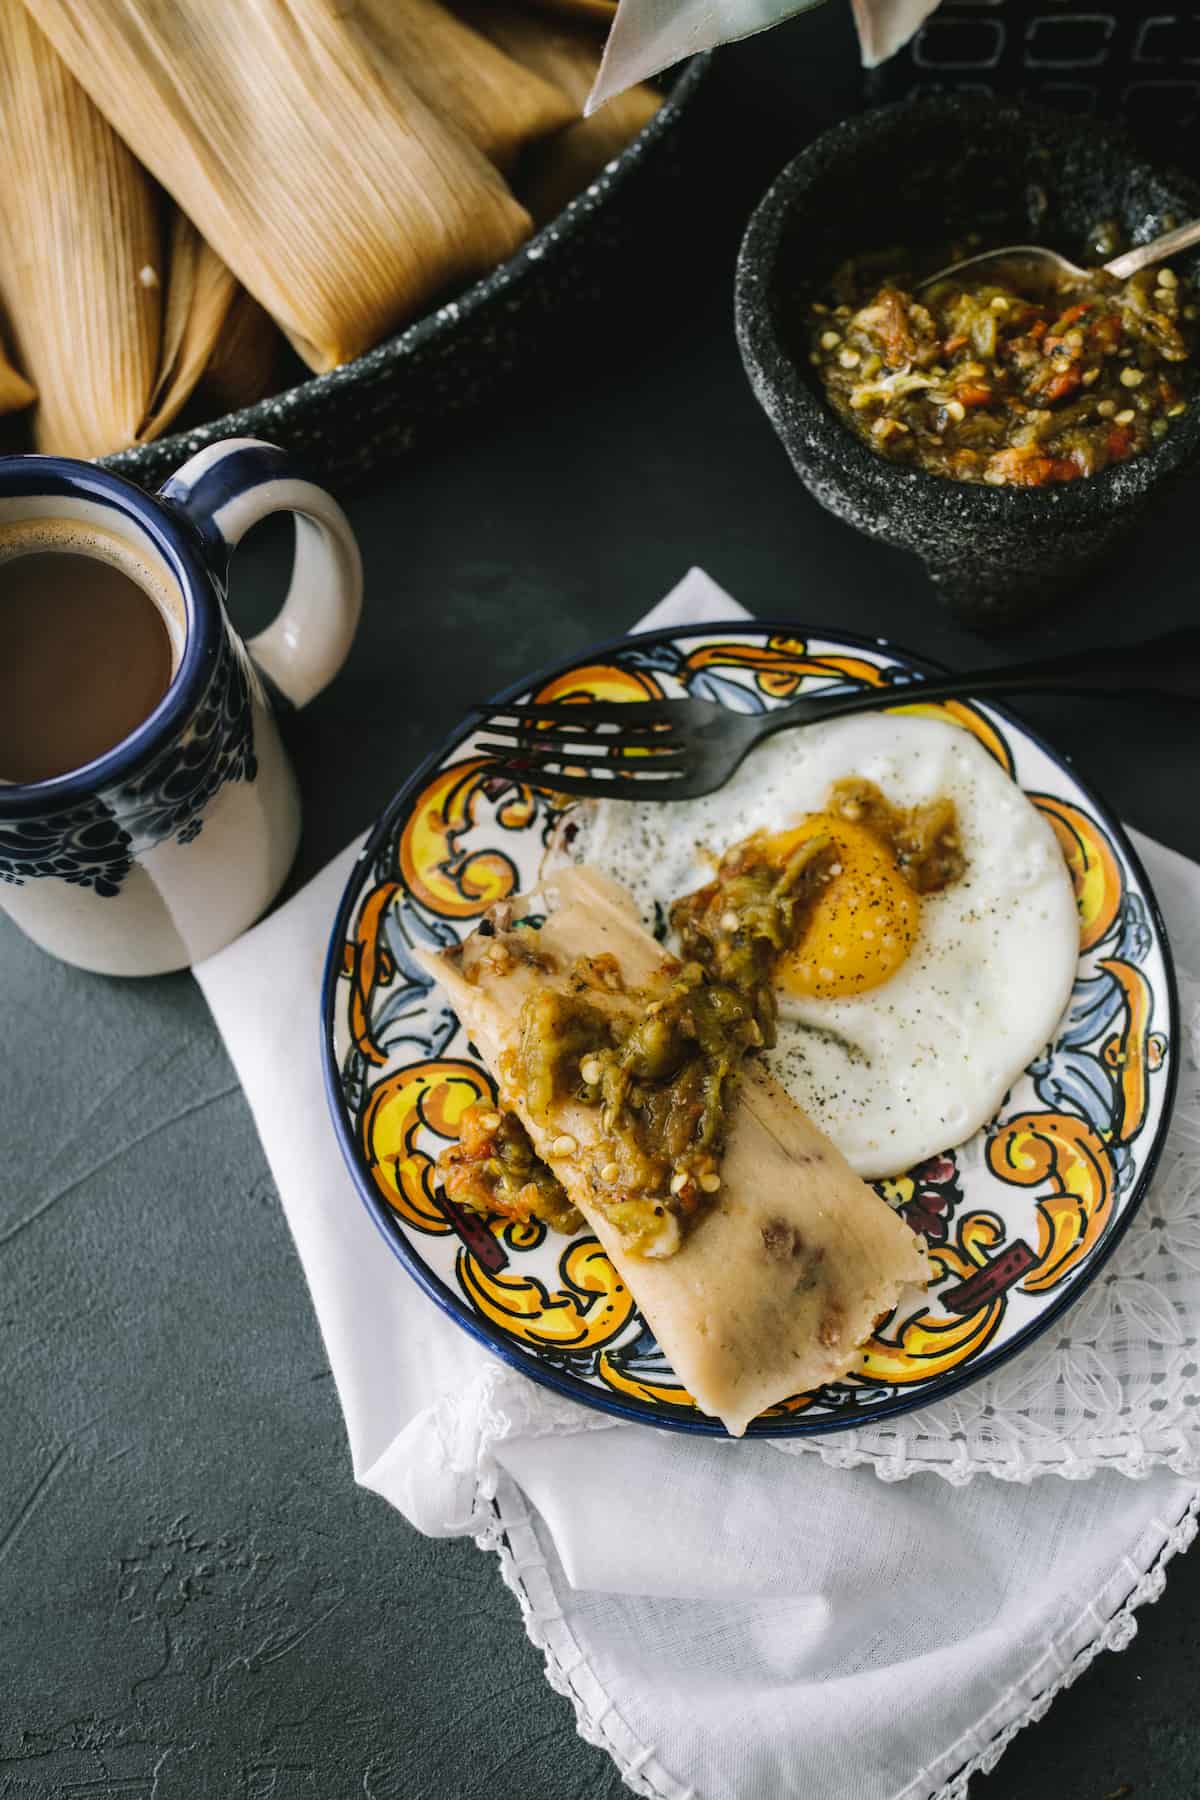 instant pot steamed pork tamale on a colorful hand-painted plate topped with extra roasted green chiles and served with a sunny side up egg.